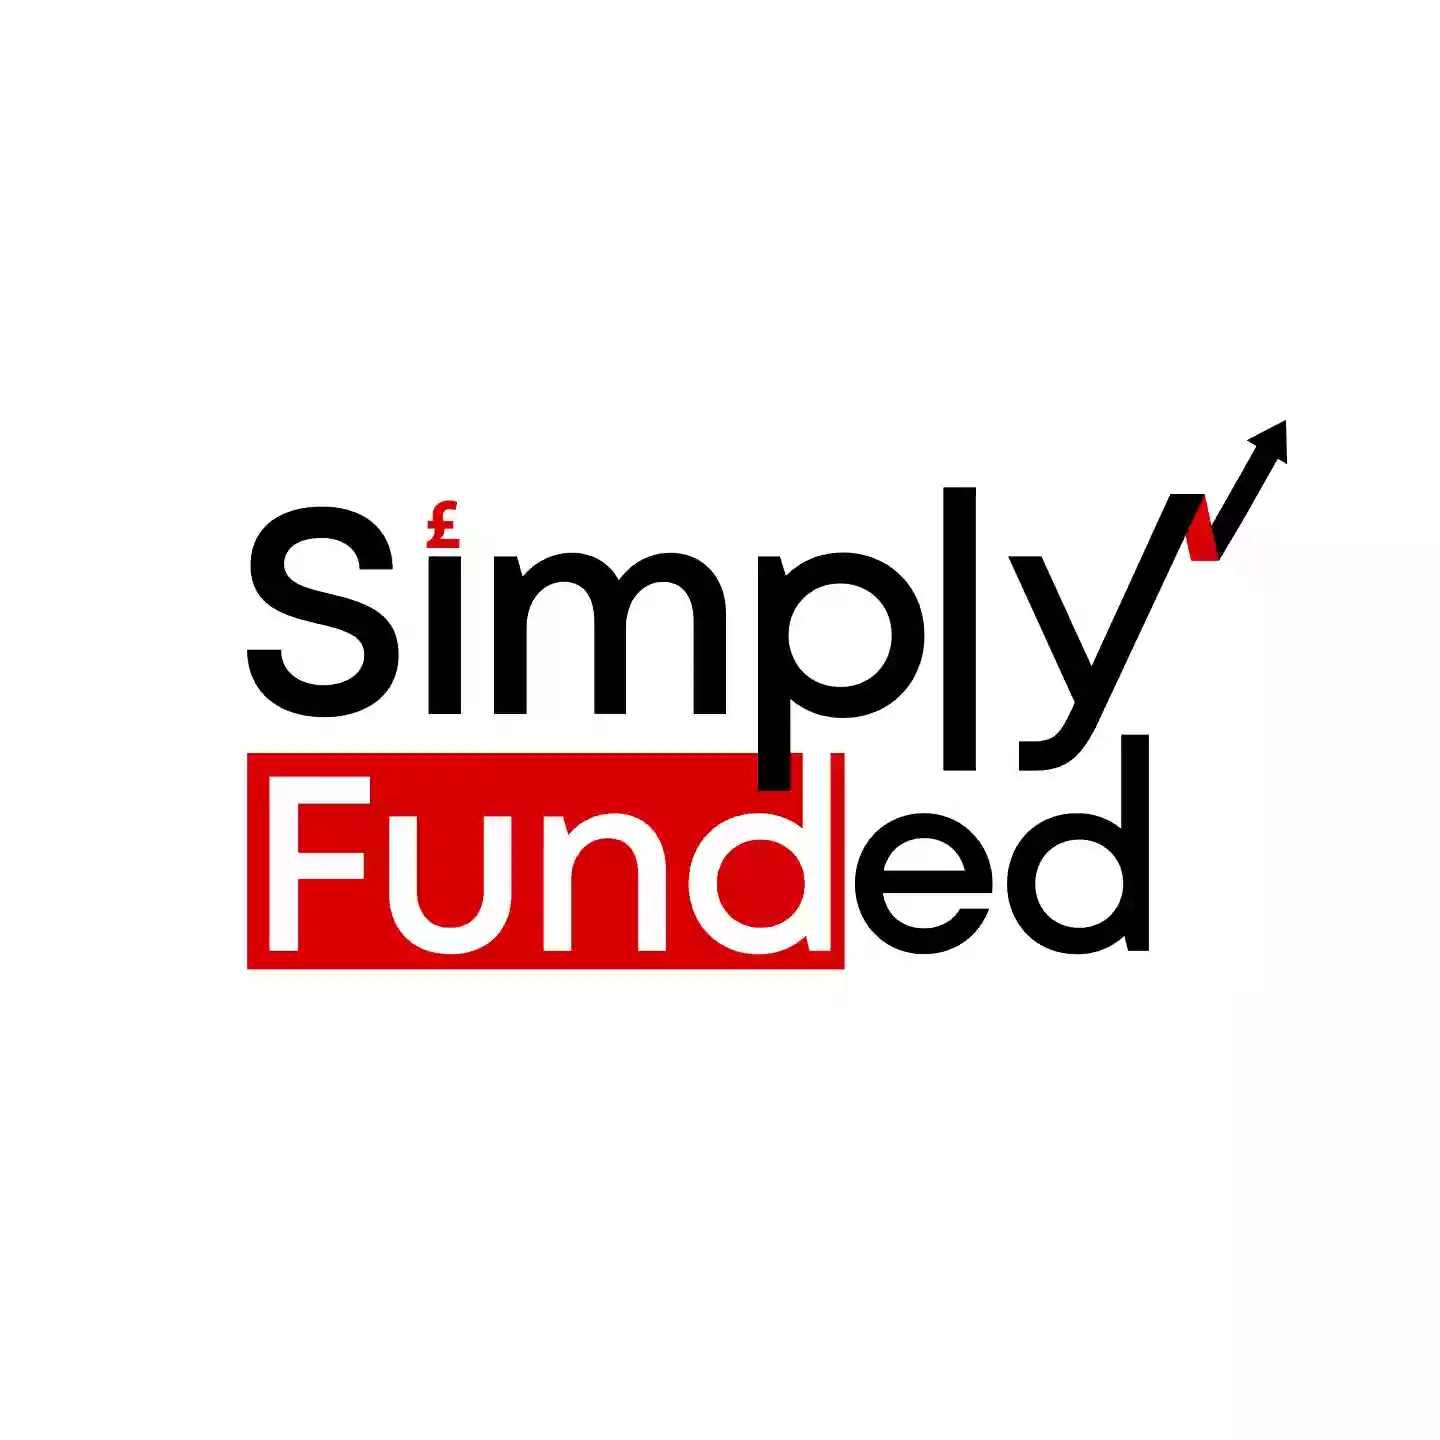 Simply Funded